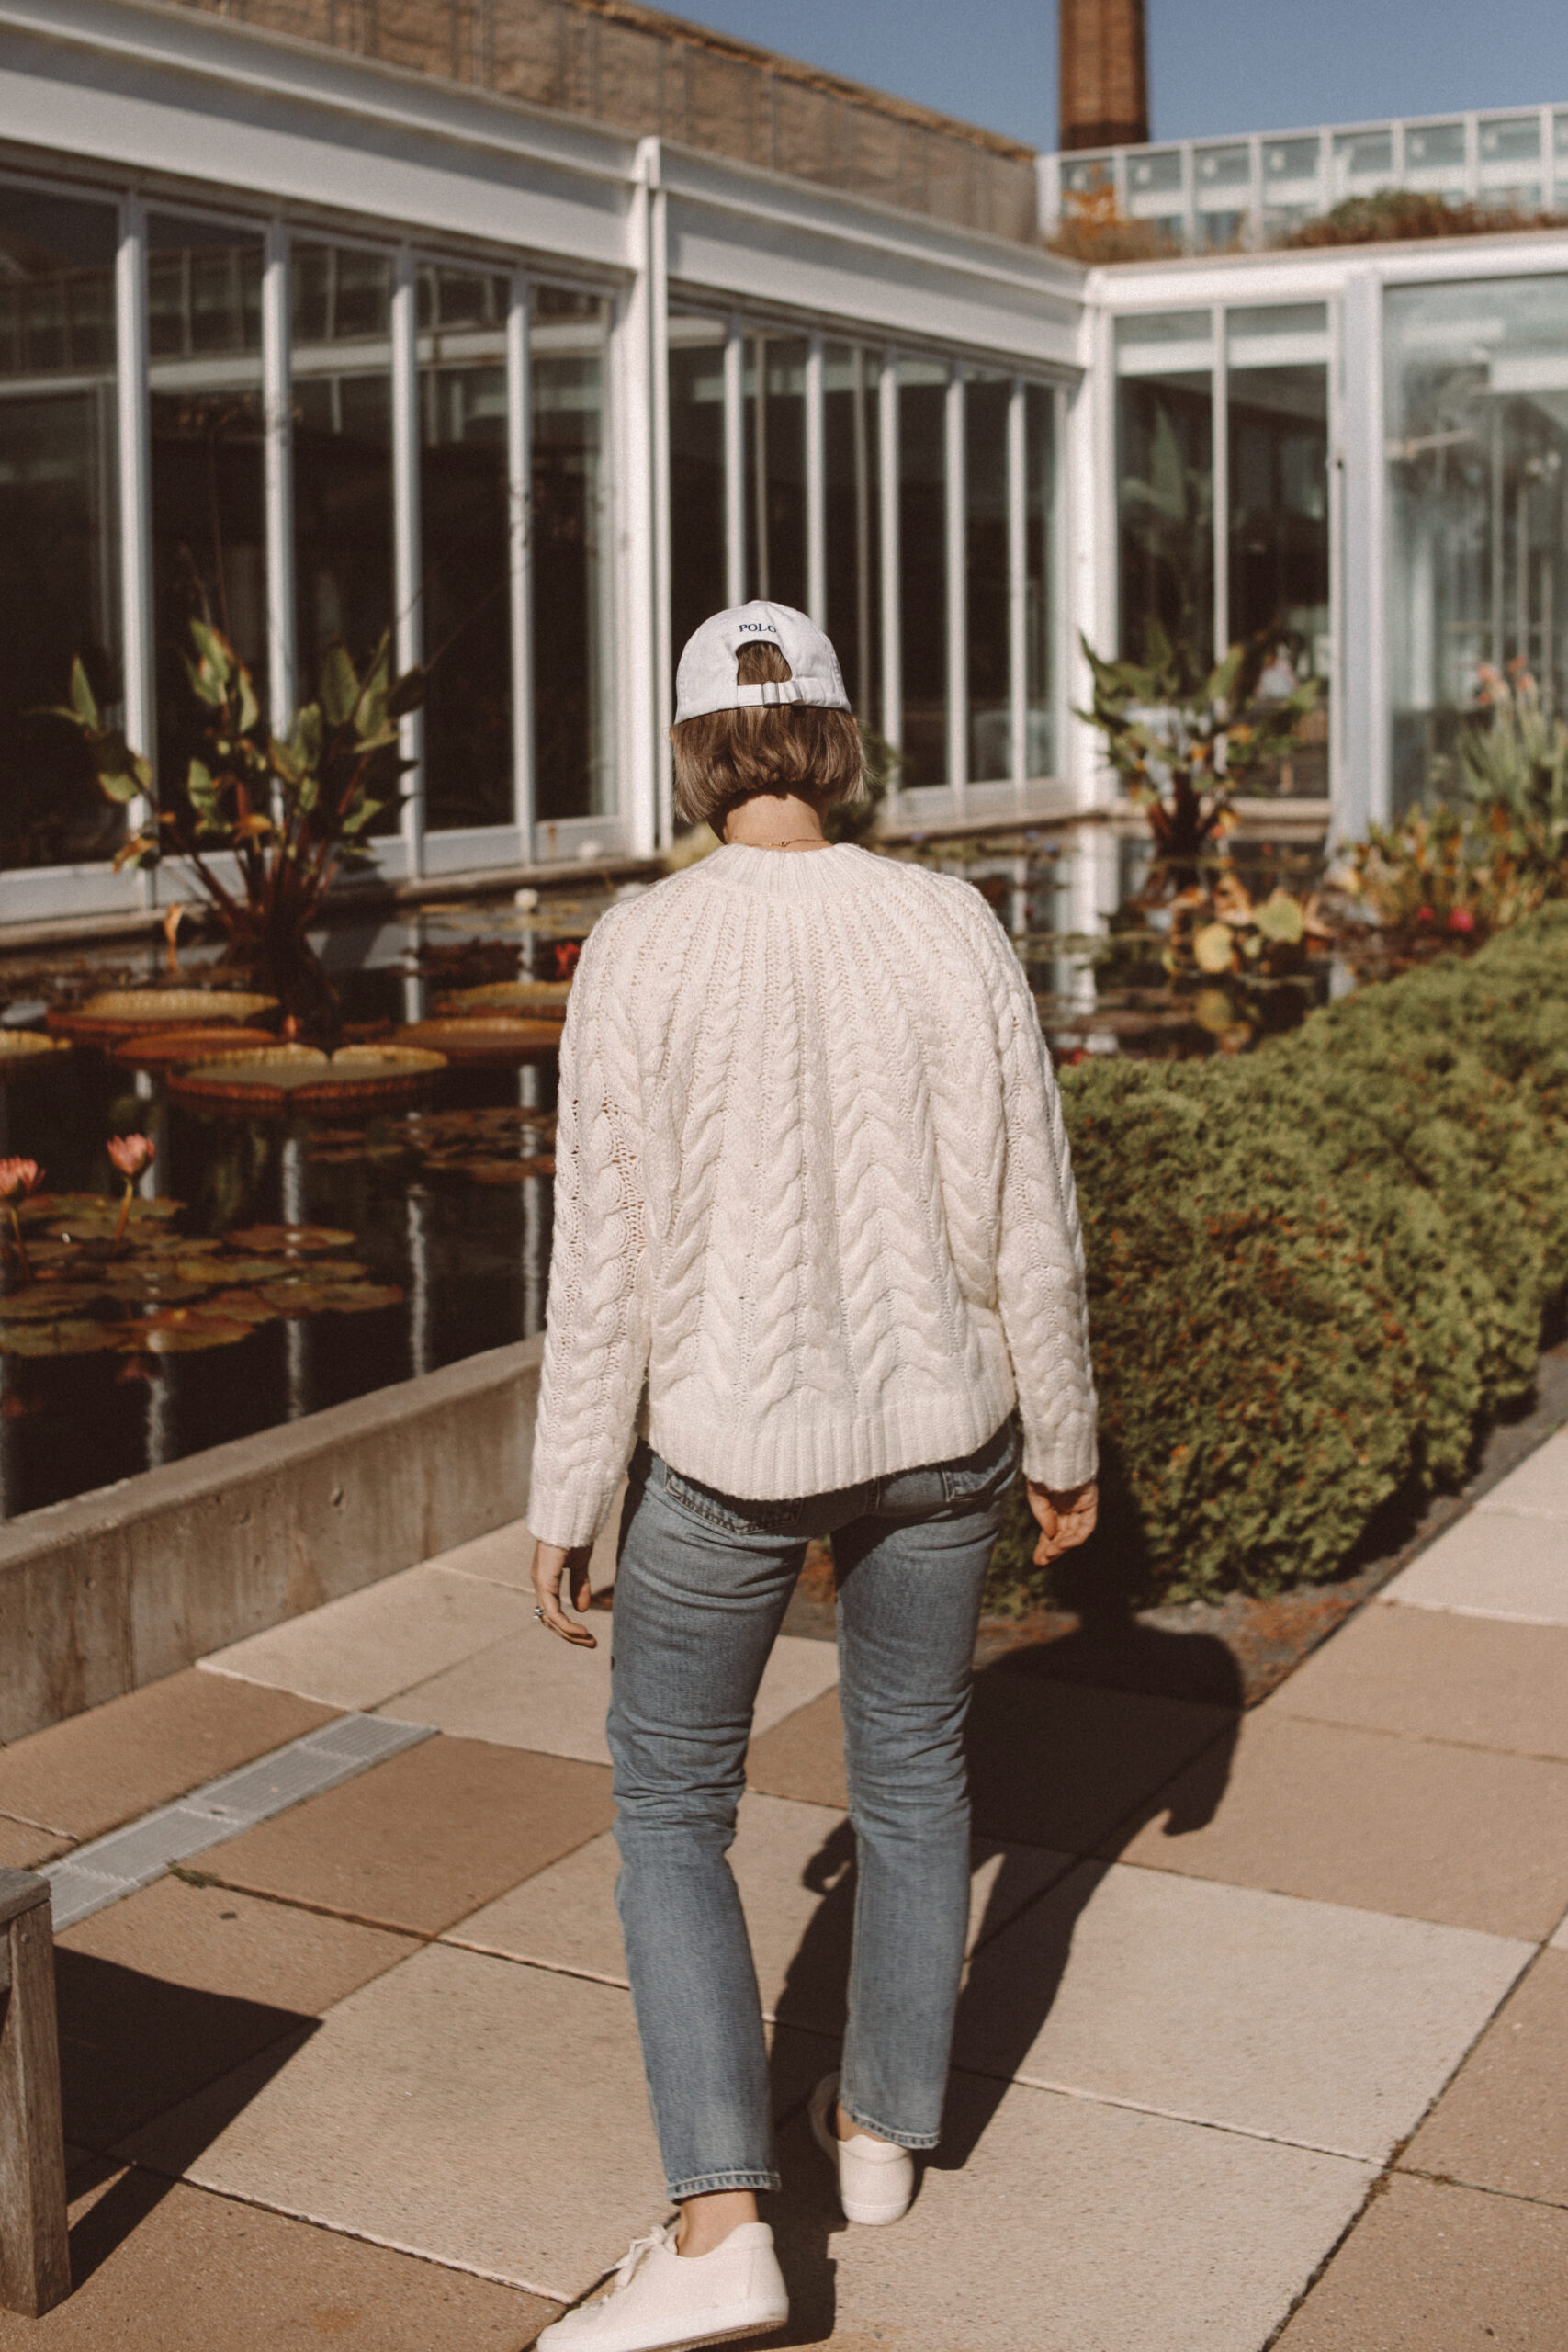 Karin Emily wears a cable knit sweater from Sezane with light wash straight leg jeans, cream sneakers, and a Ralph Lauren baseball hat